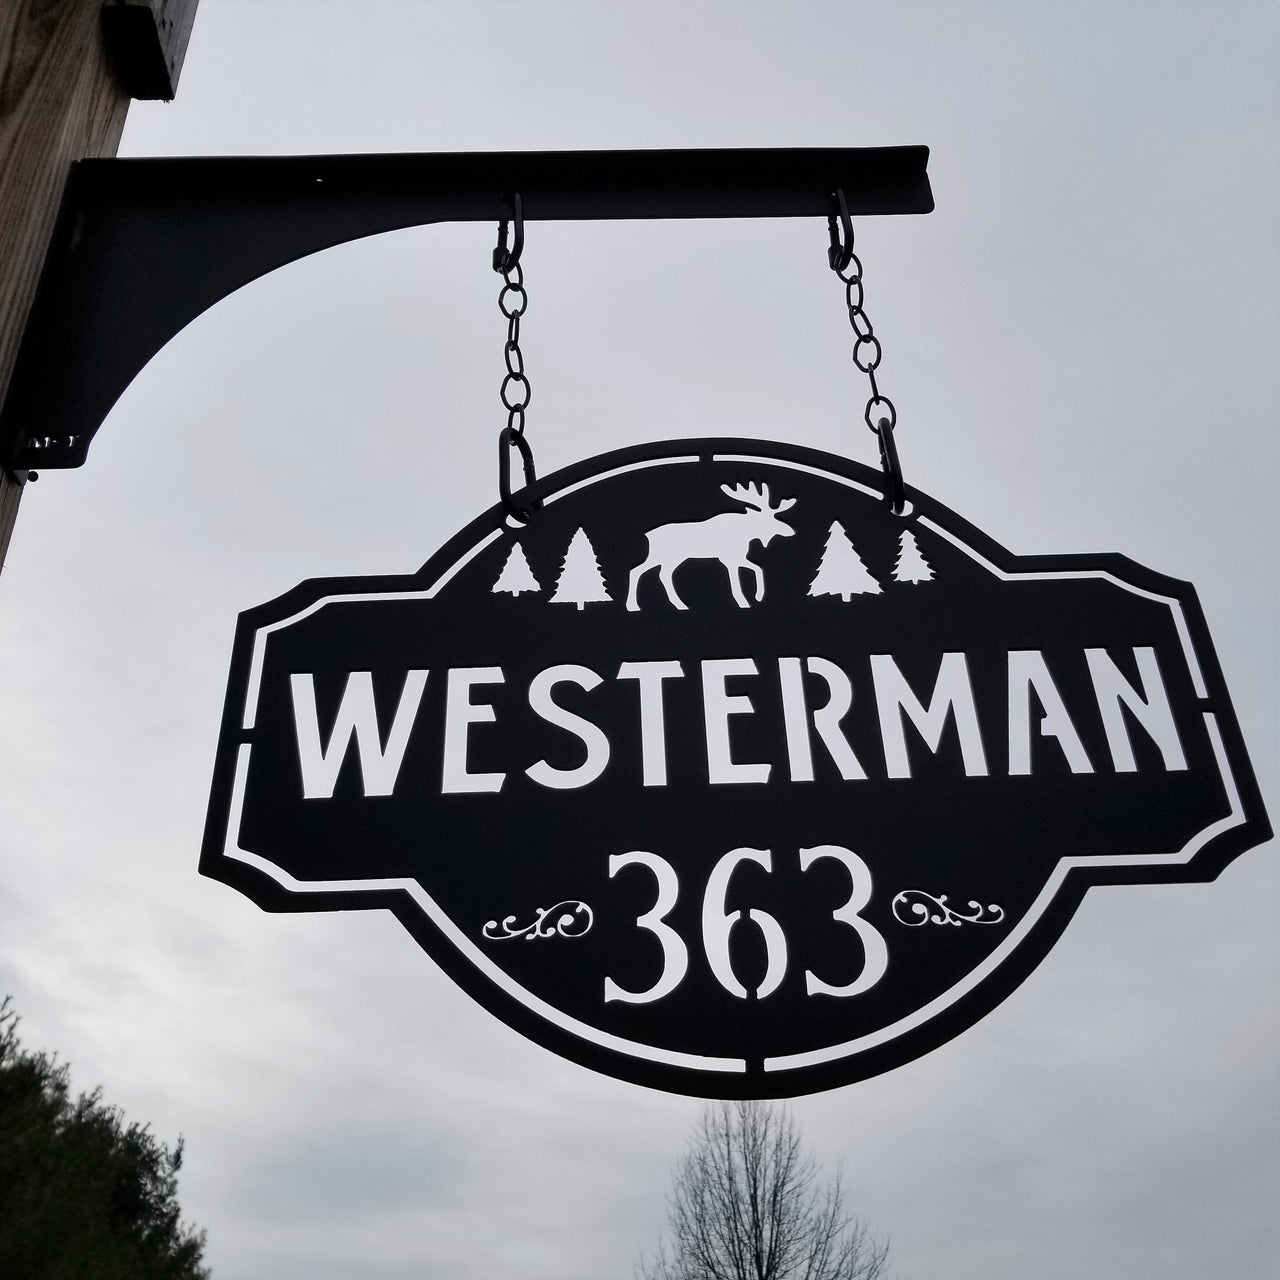 This is a personalized metal address sign that hangs from a hanging bracket mounted to a wooden post.  The sign is powder coated black and features a forest scene with a moose in the center. The sign reads, "Westerman 363".